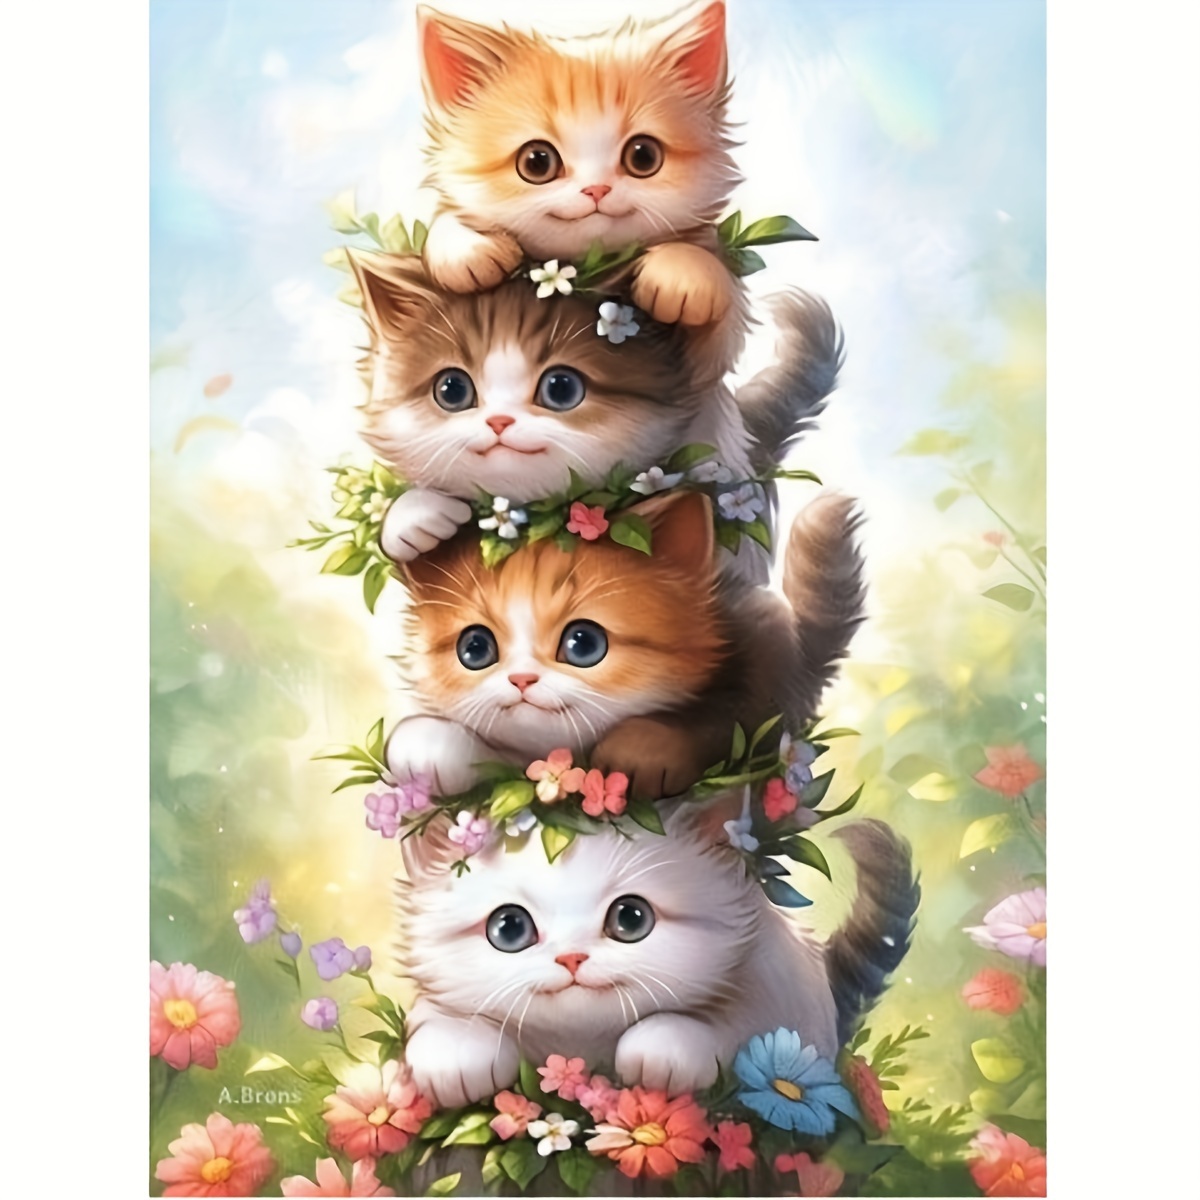 

3 Kitten Diamond Painting Tools For Adults 5 D Diy Diamond Art Tools For Beginners With Round Full Diamond Gems Painting Art Decor Gifts For Home Wall